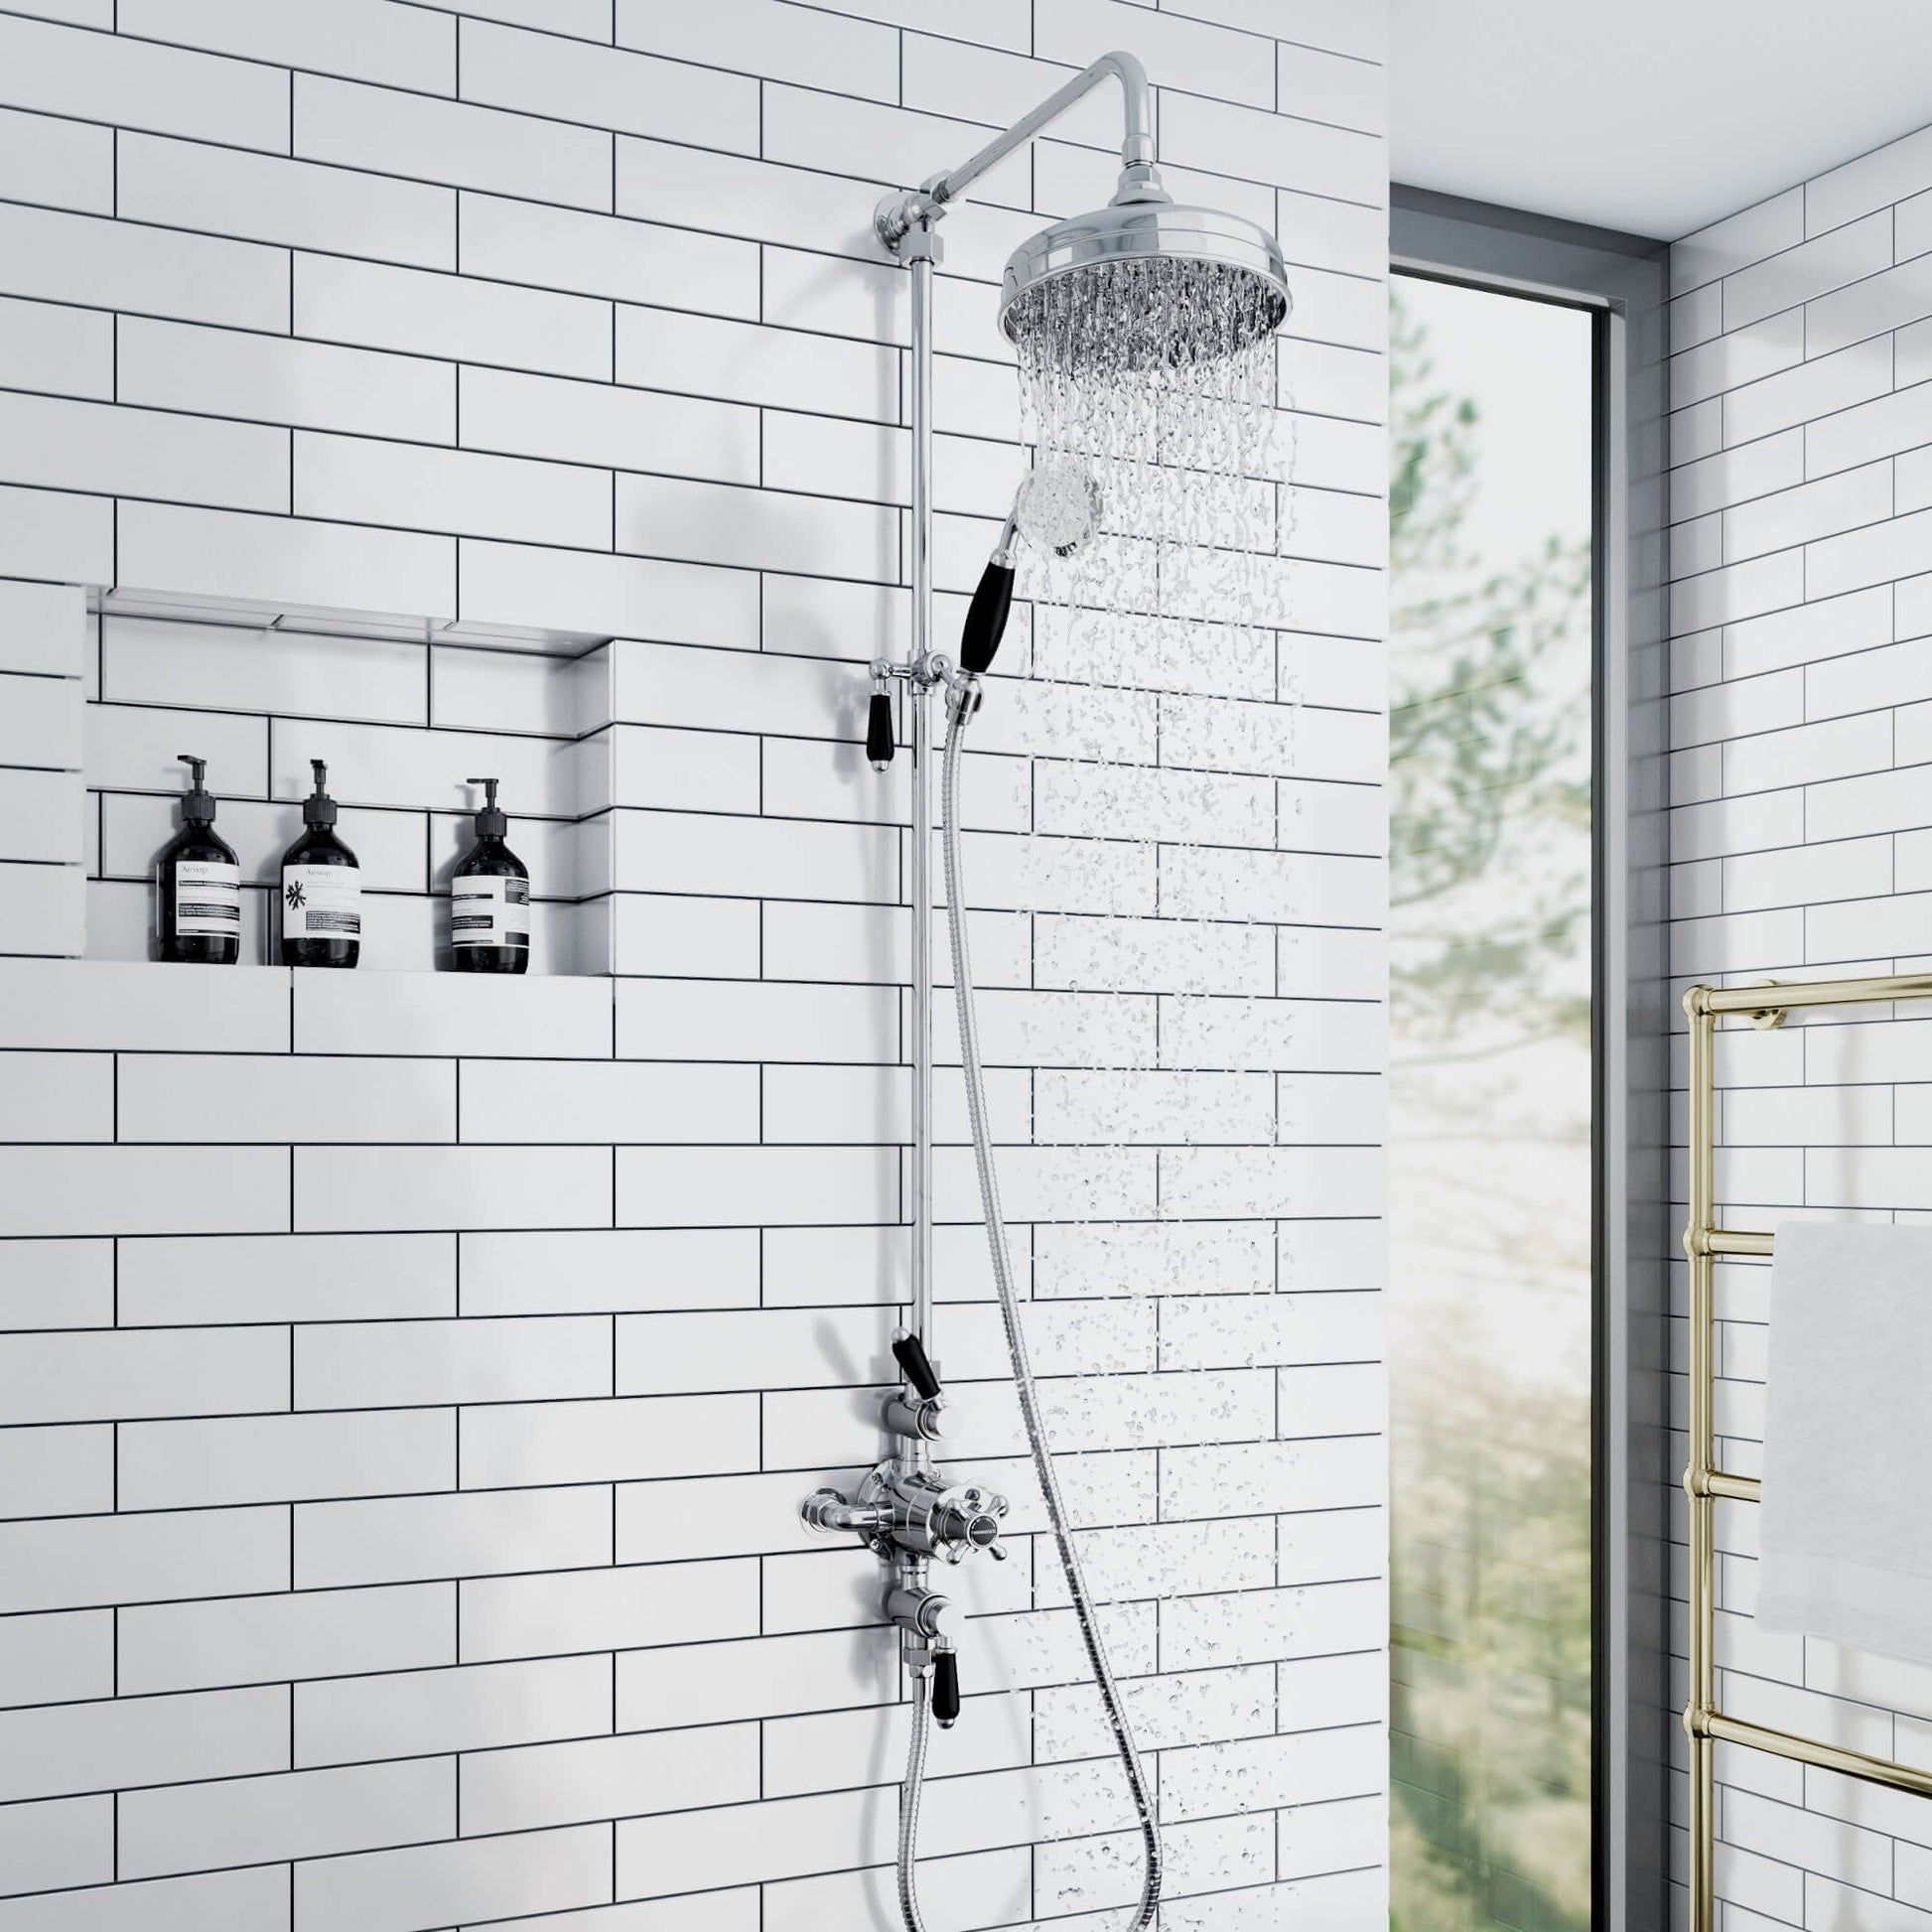 Downton traditional triple thermostatic shower valve two outlet - chrome & black - Showers